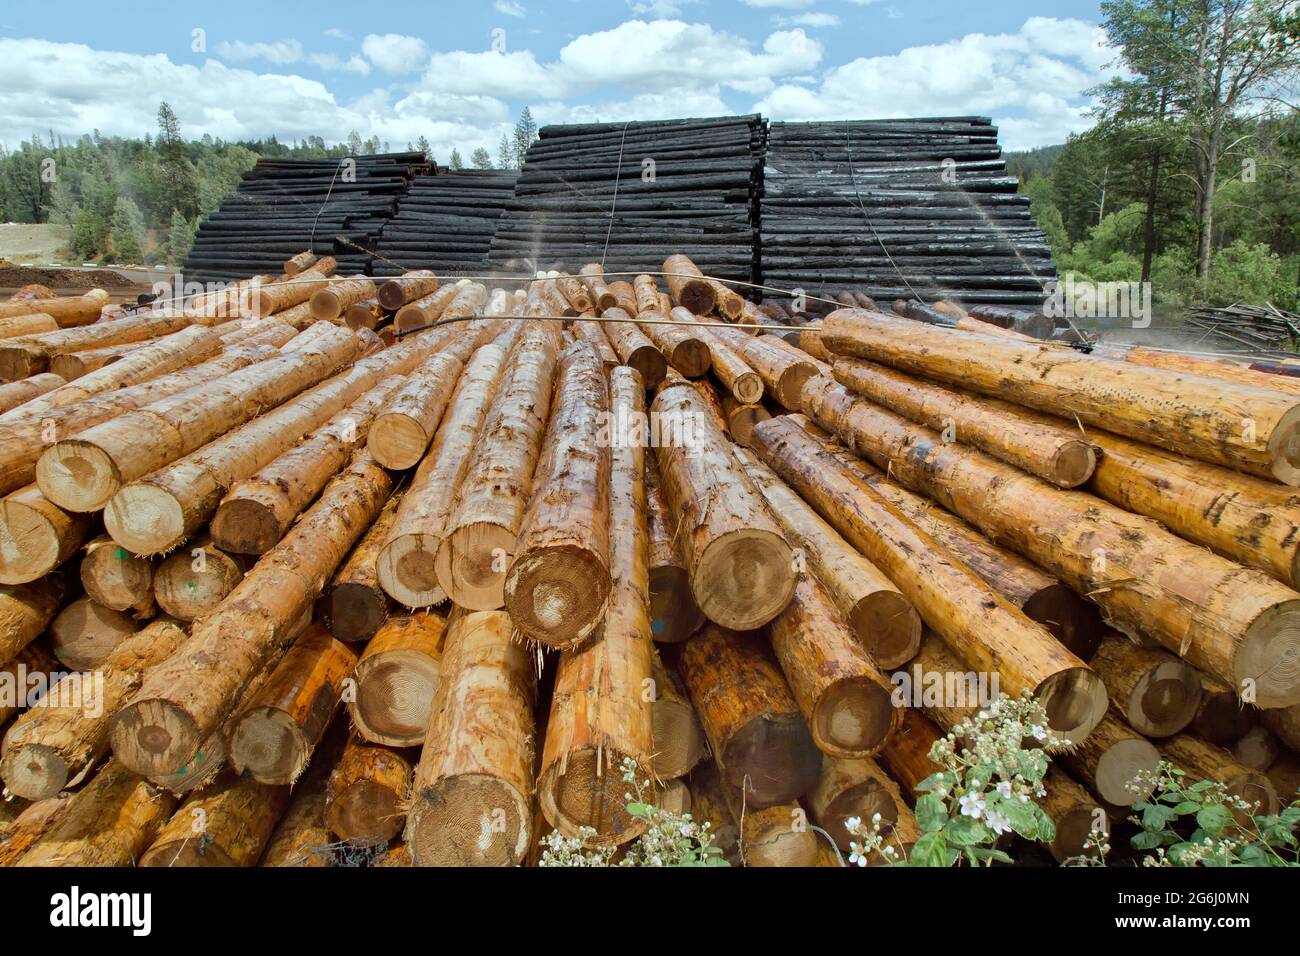 Harvested & peeled White Fir 'Abies concolor' logs, irrigating/treating wood to keep from insects & fungi at lumber mill. Stock Photo